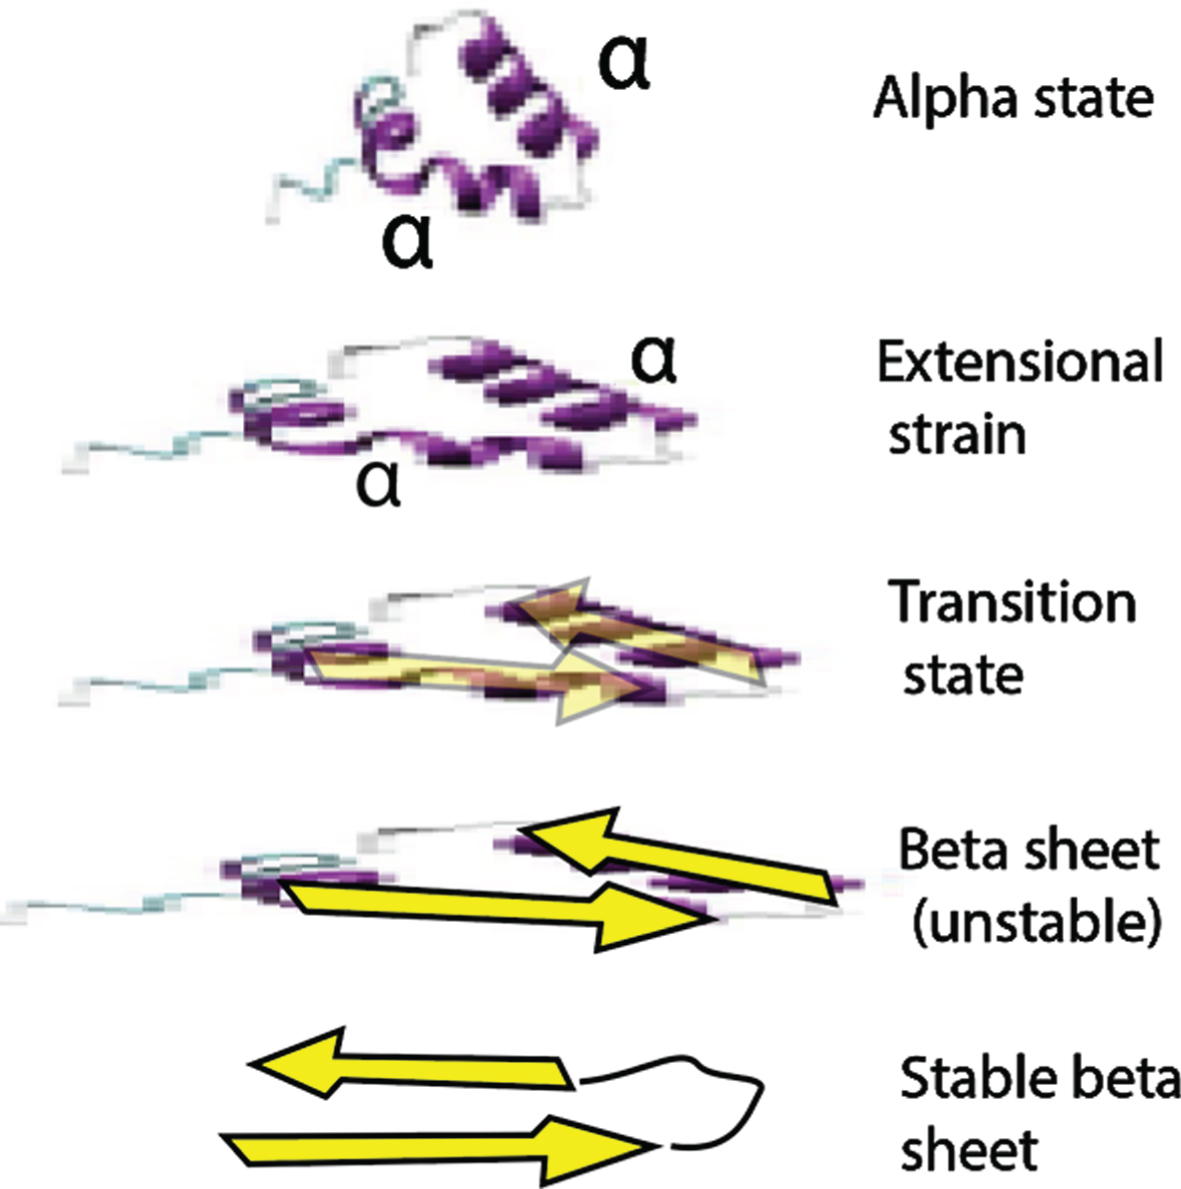 Proposed mechanism for the rapid strain-induced transformation of Aβ from an IDP alpha conformation to a beta hairpin conformation through extensional stretching distortion. This particular alpha state was selected from favored IDP states in [60]. This beta sheet structured molecule may then react quickly with another and possibly form a dimer seed. This aggregation reaction could take place over many stretch-and-release cycles.